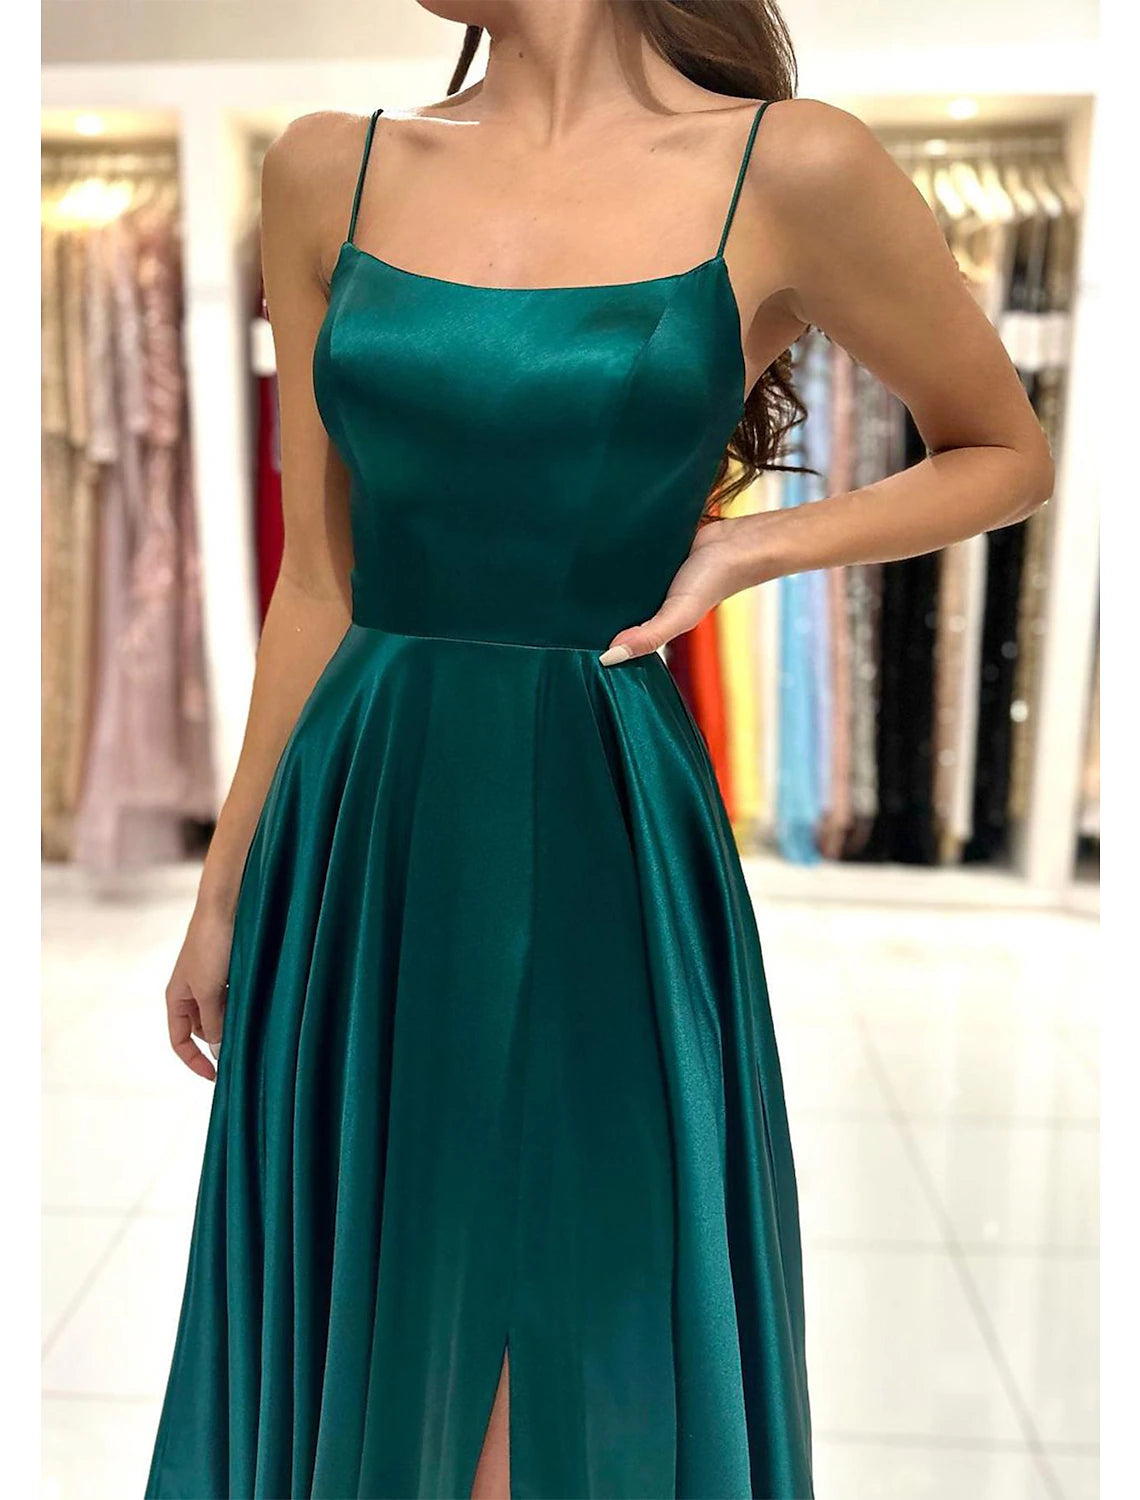 A-Line Prom Dress Red Green Dresses Empire Dress Red Green Dress Formal Prom Floor Length Sleeveless Sweetheart Imitation Silk Backless with Pleats